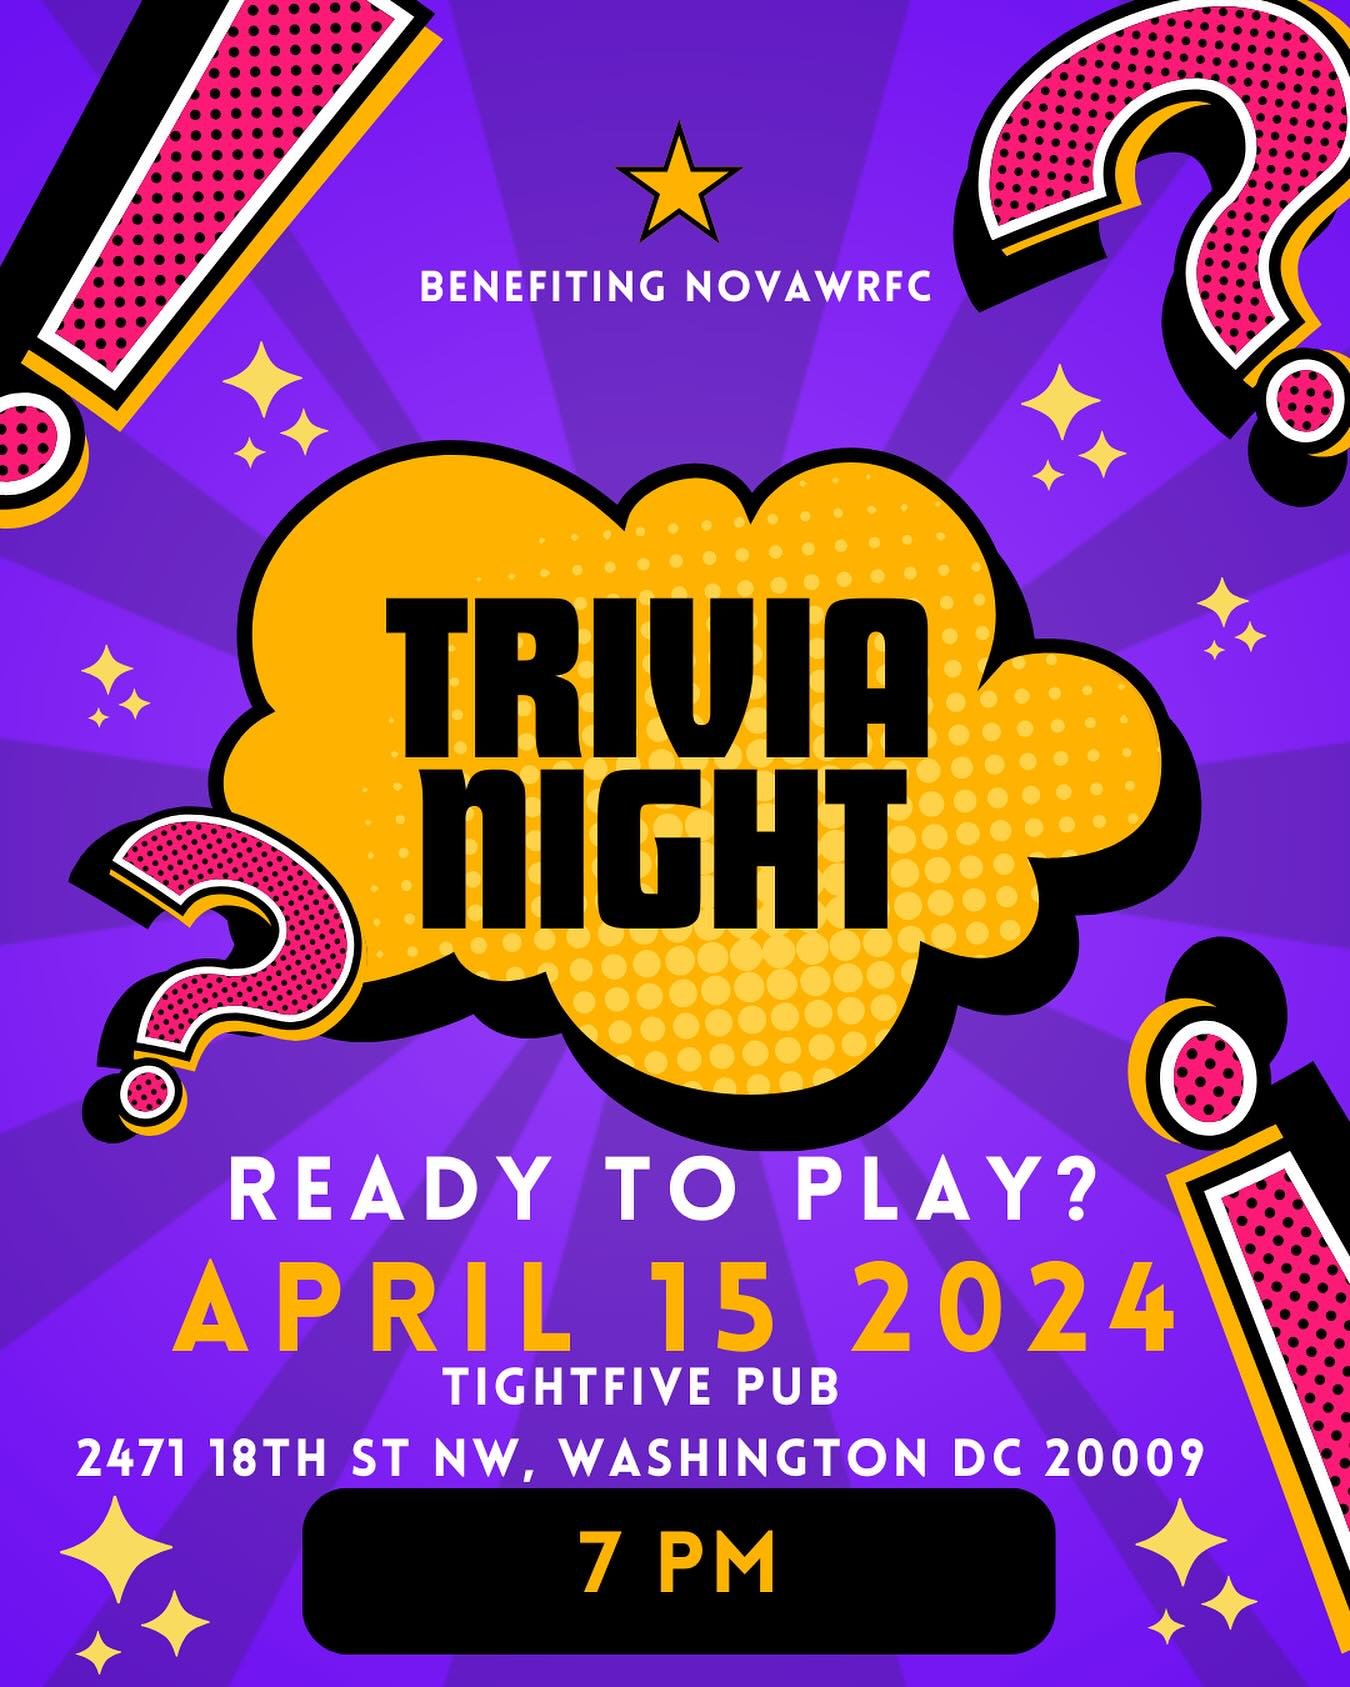 Don&rsquo;t make your Monday night boring! 
Come and test your trivia knowledge, grab a drink, stay a while- make new friends!

All benefiting us as we head to regionals! 
AND the weather is going to be amazing! 

Come out and celebrate the unofficia